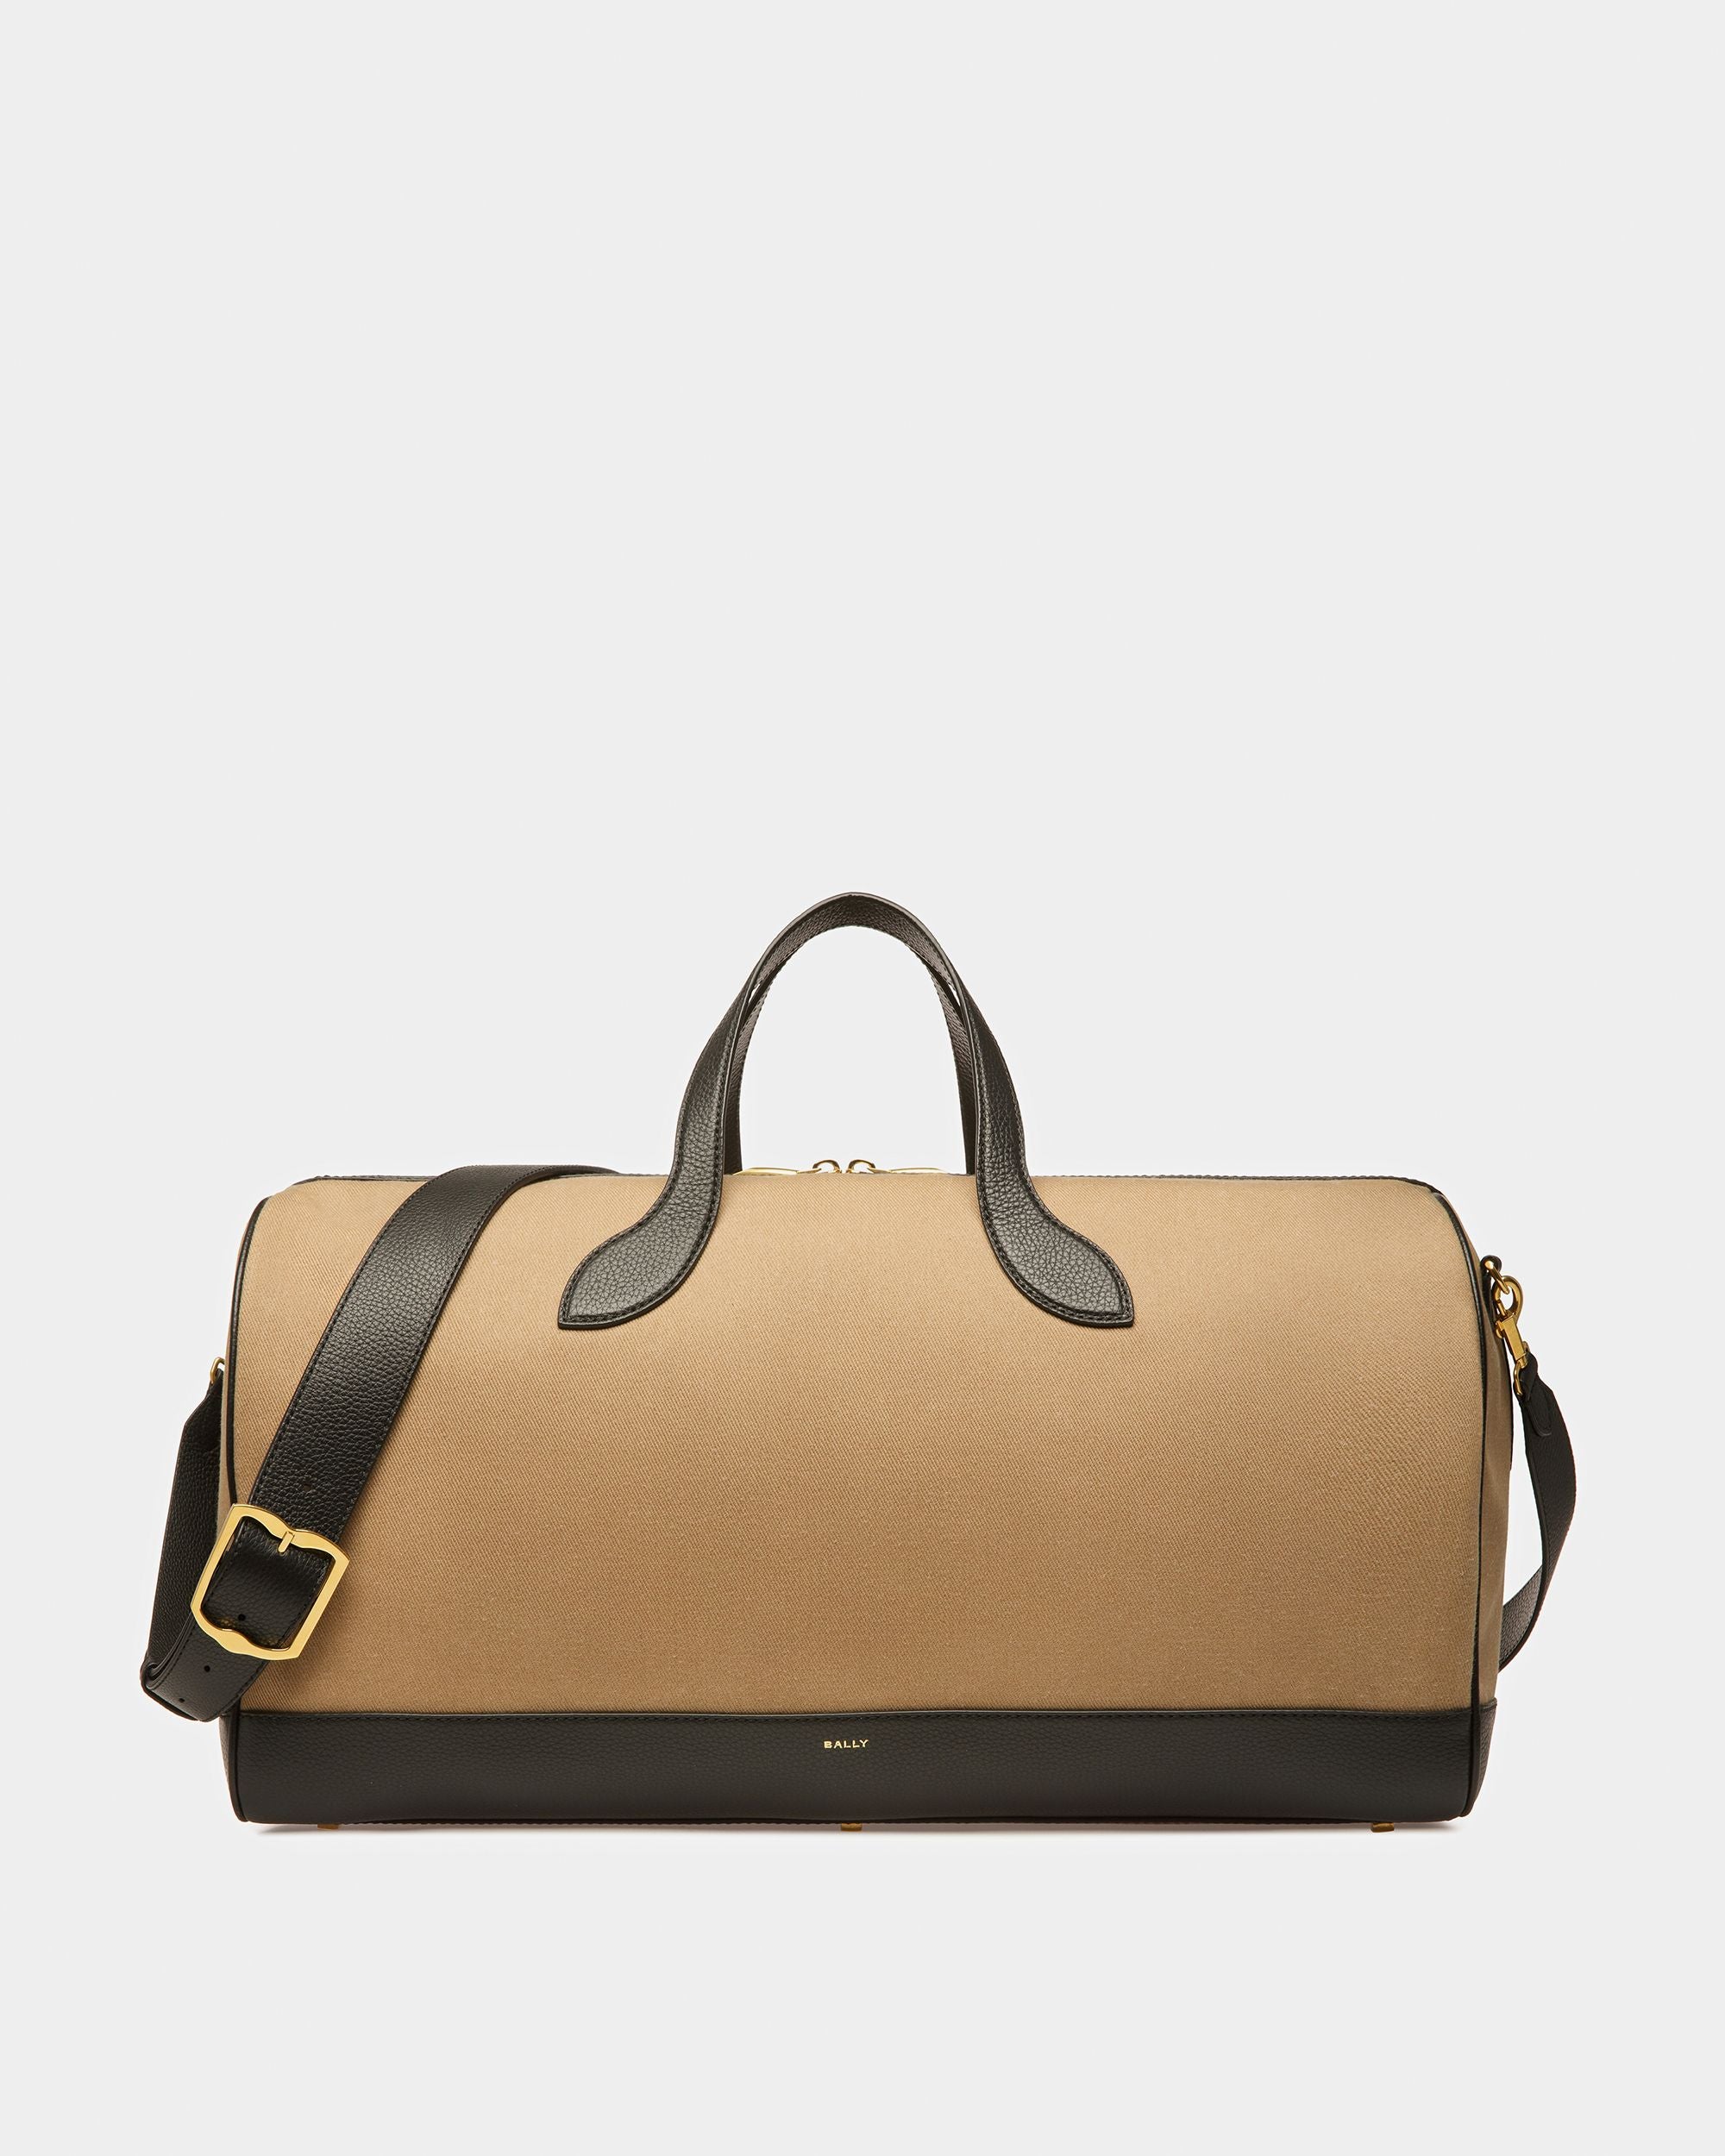 36 Hours | Men's Travel Bag | Sand And Black Fabric And Leather | Bally | Still Life Front